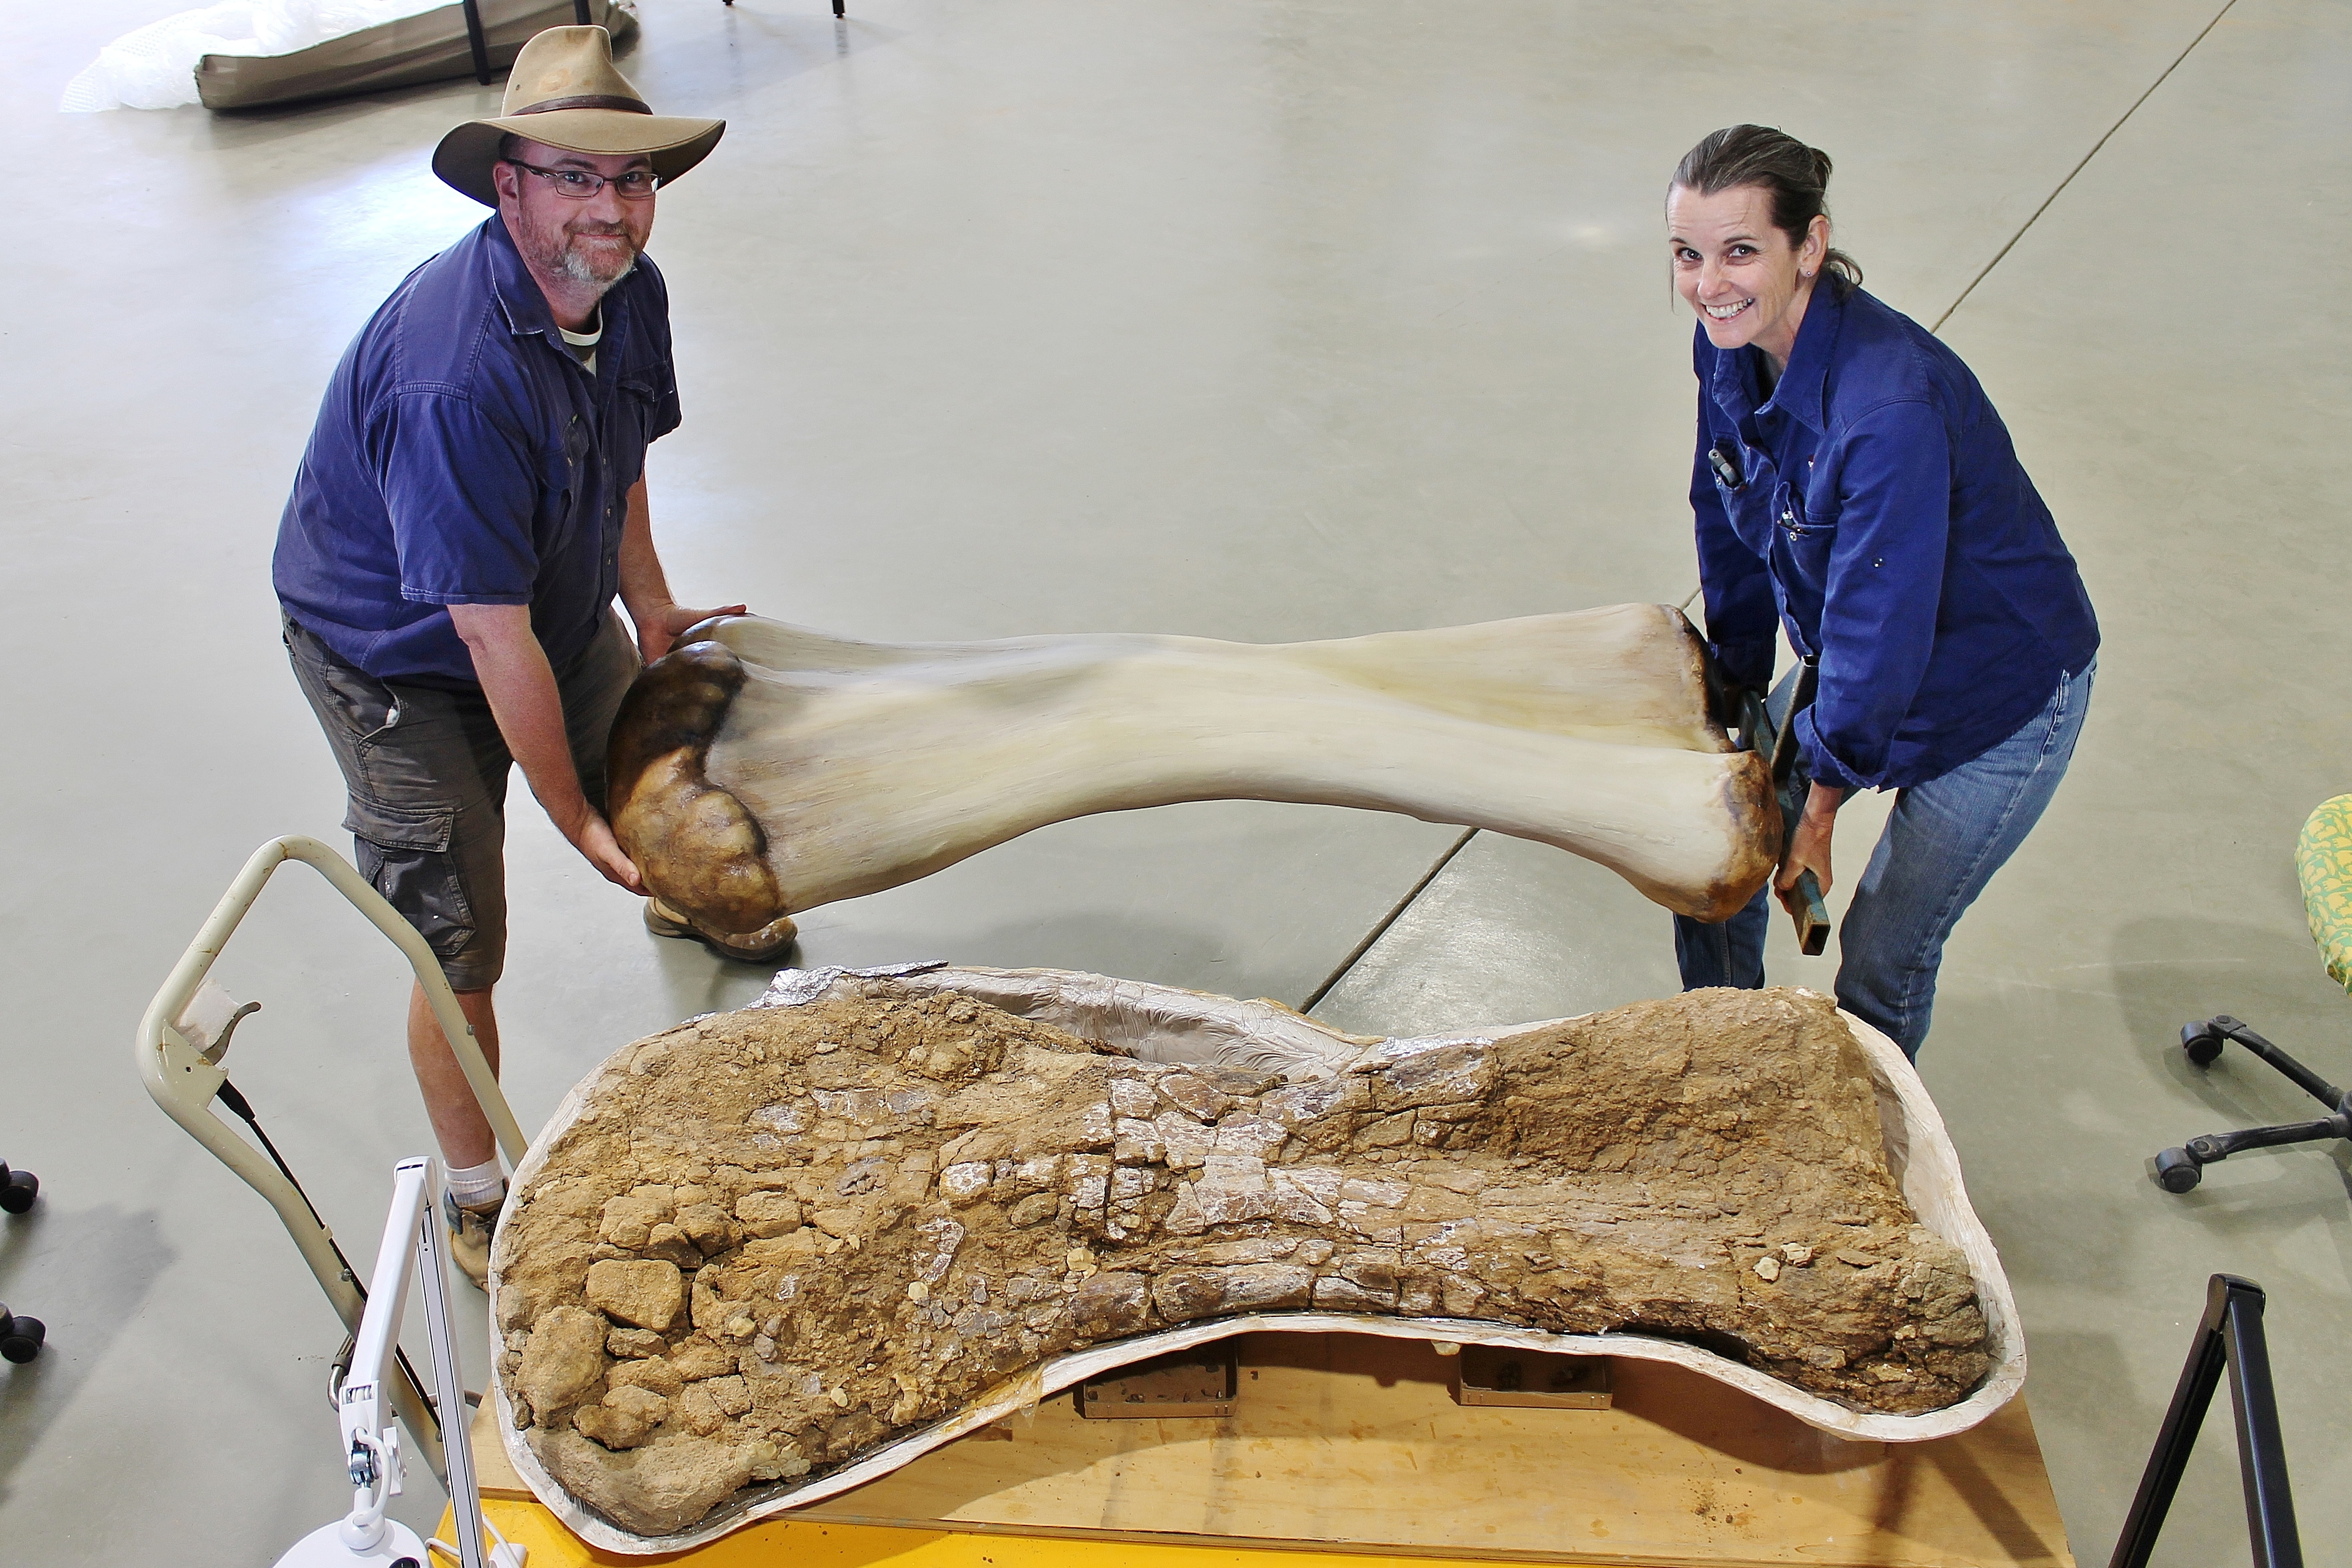 New species of dinosaur unearthed in Queensland confirmed to be largest ever found in Australia